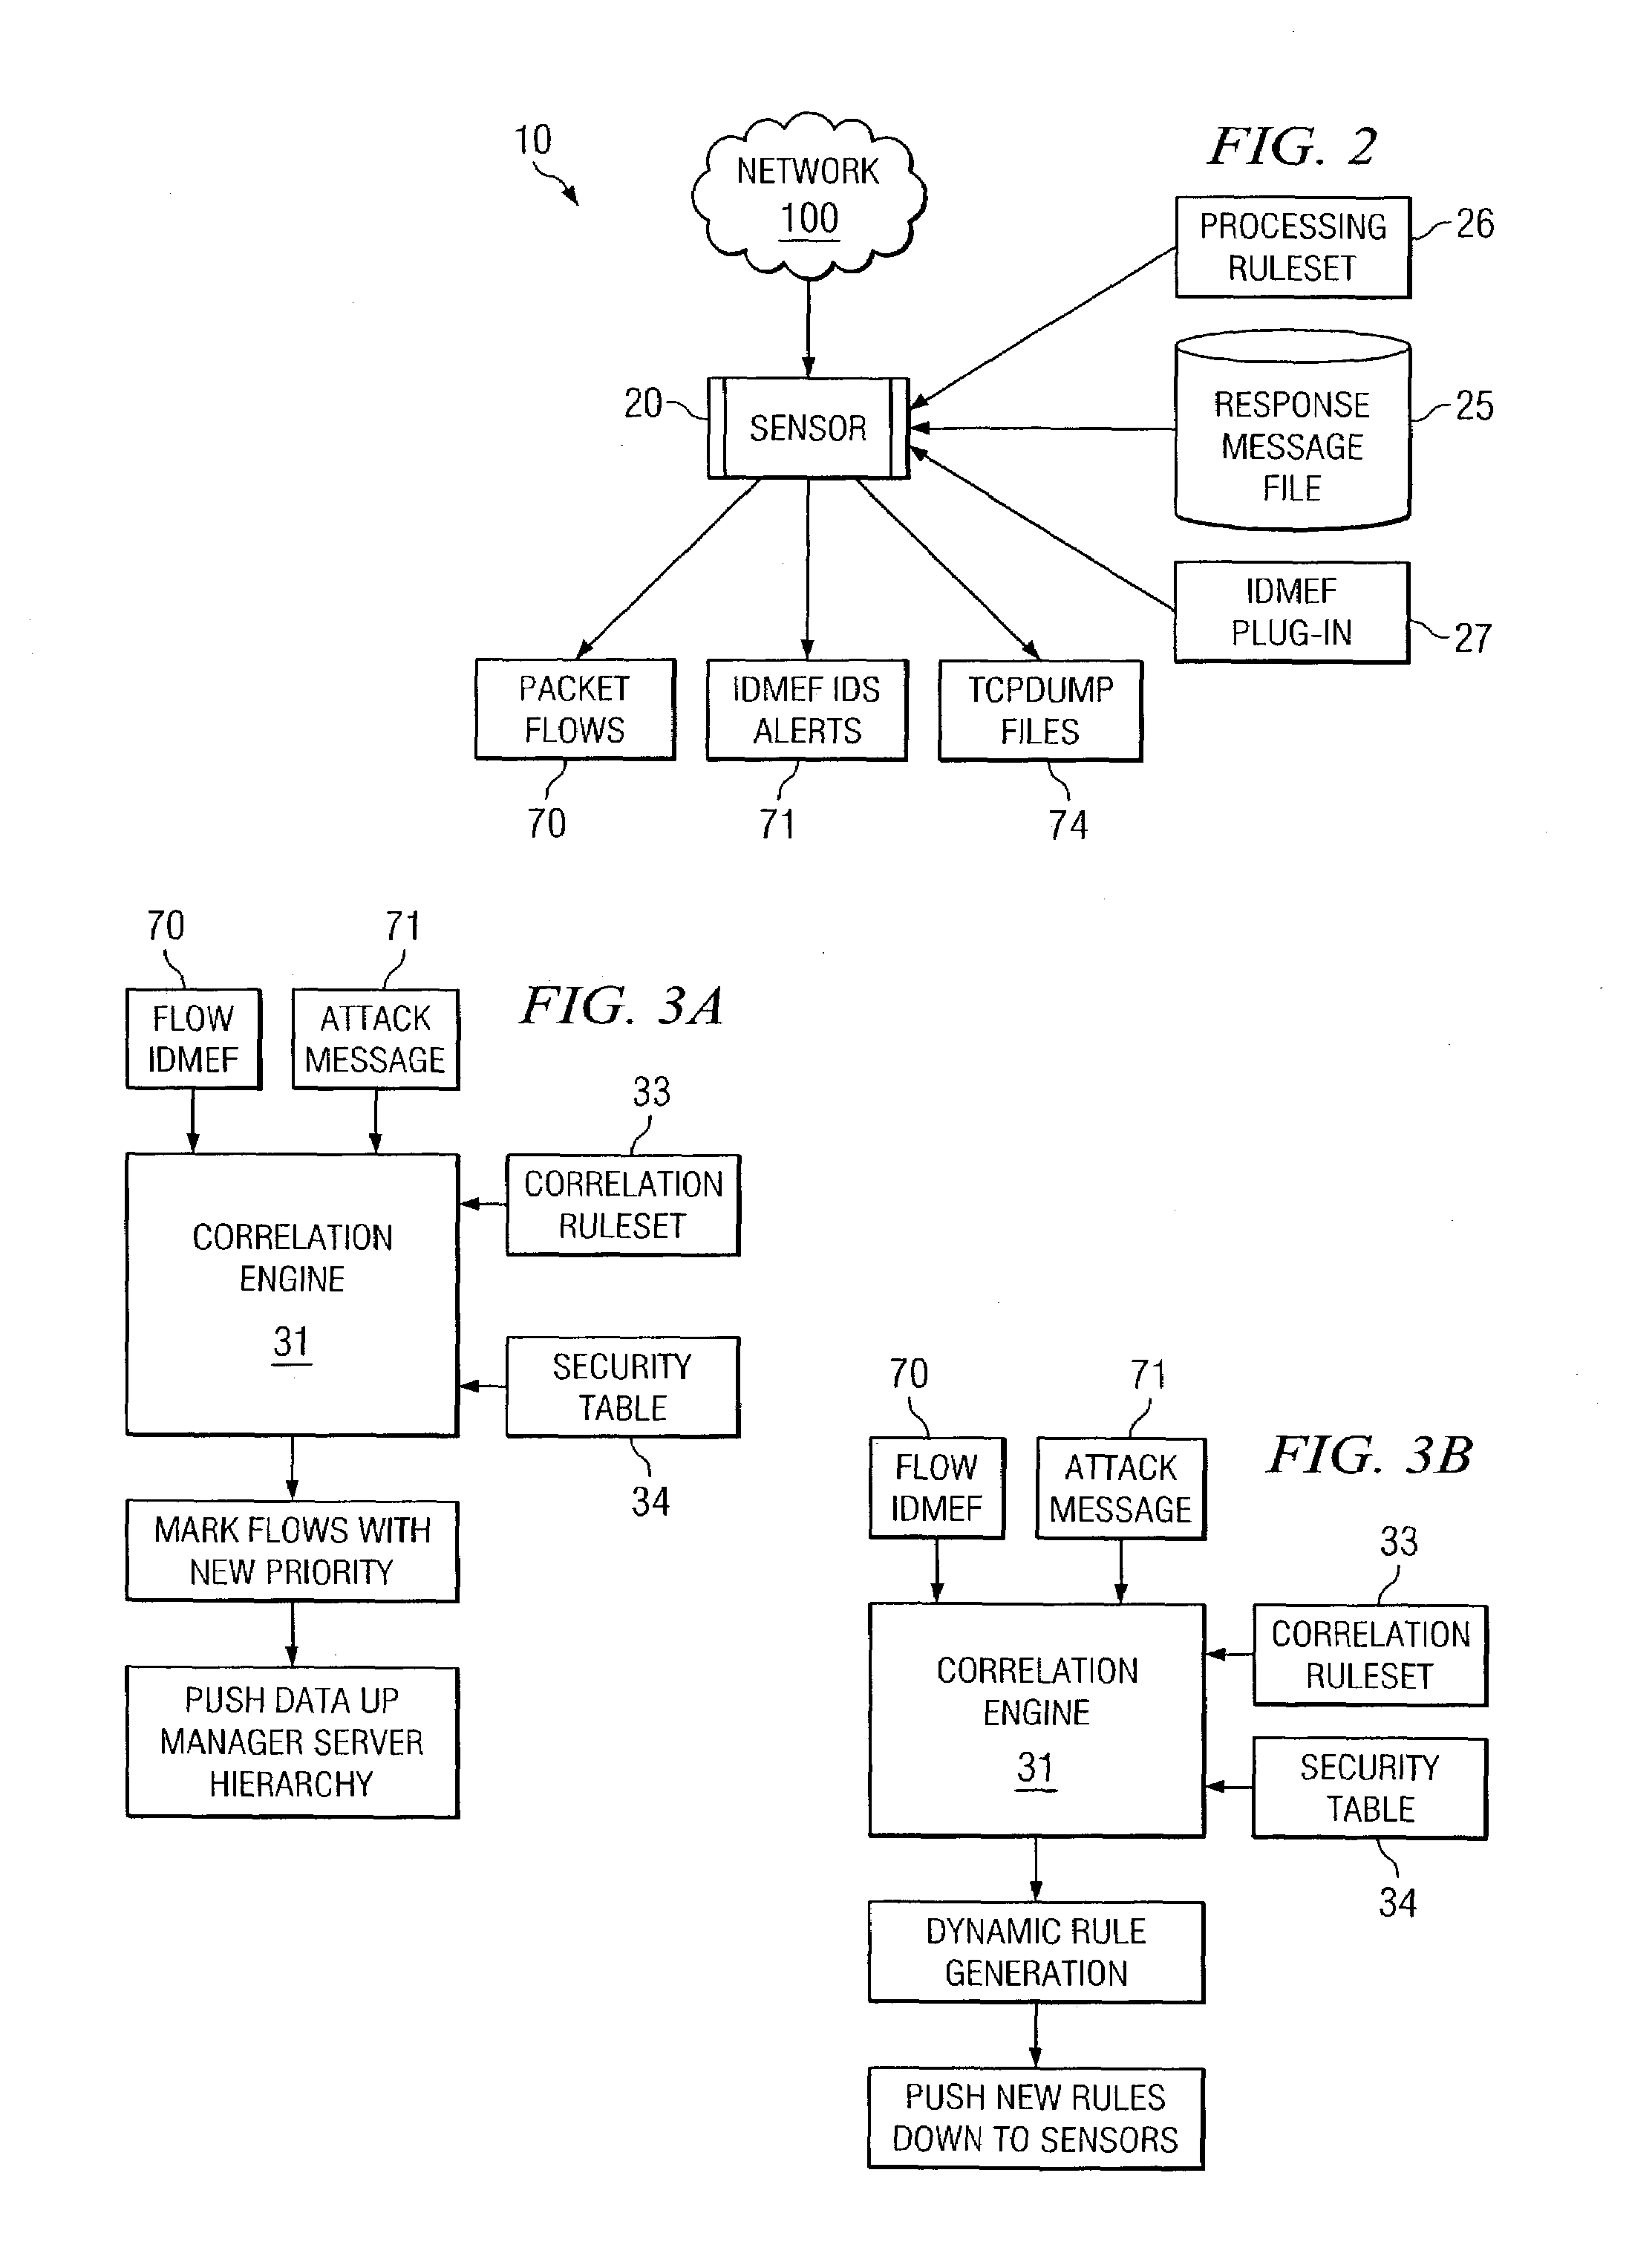 Graphical user interface for an enterprise intrusion detection system